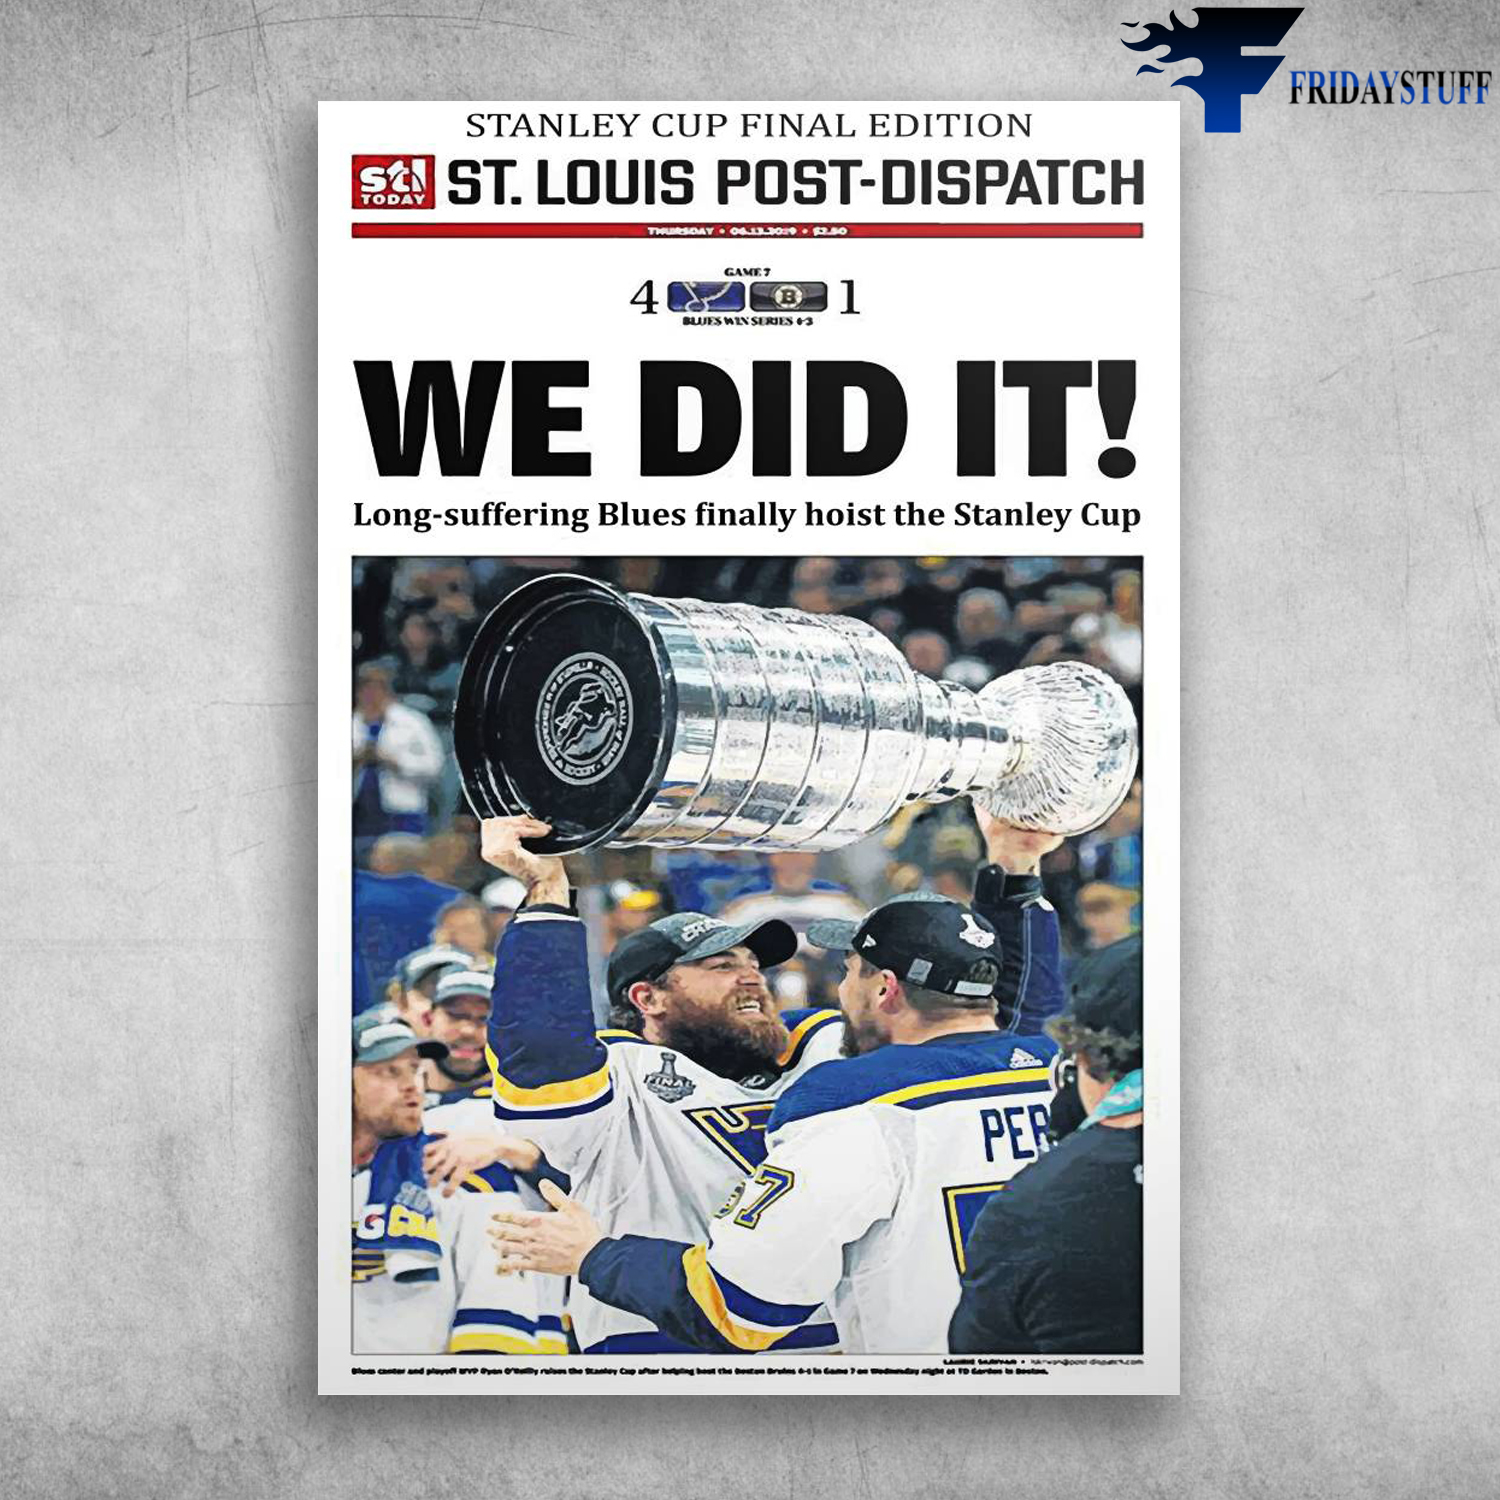 Stanley Cup Final Edition St Louis Post Dispatch We Did It - FridayStuff